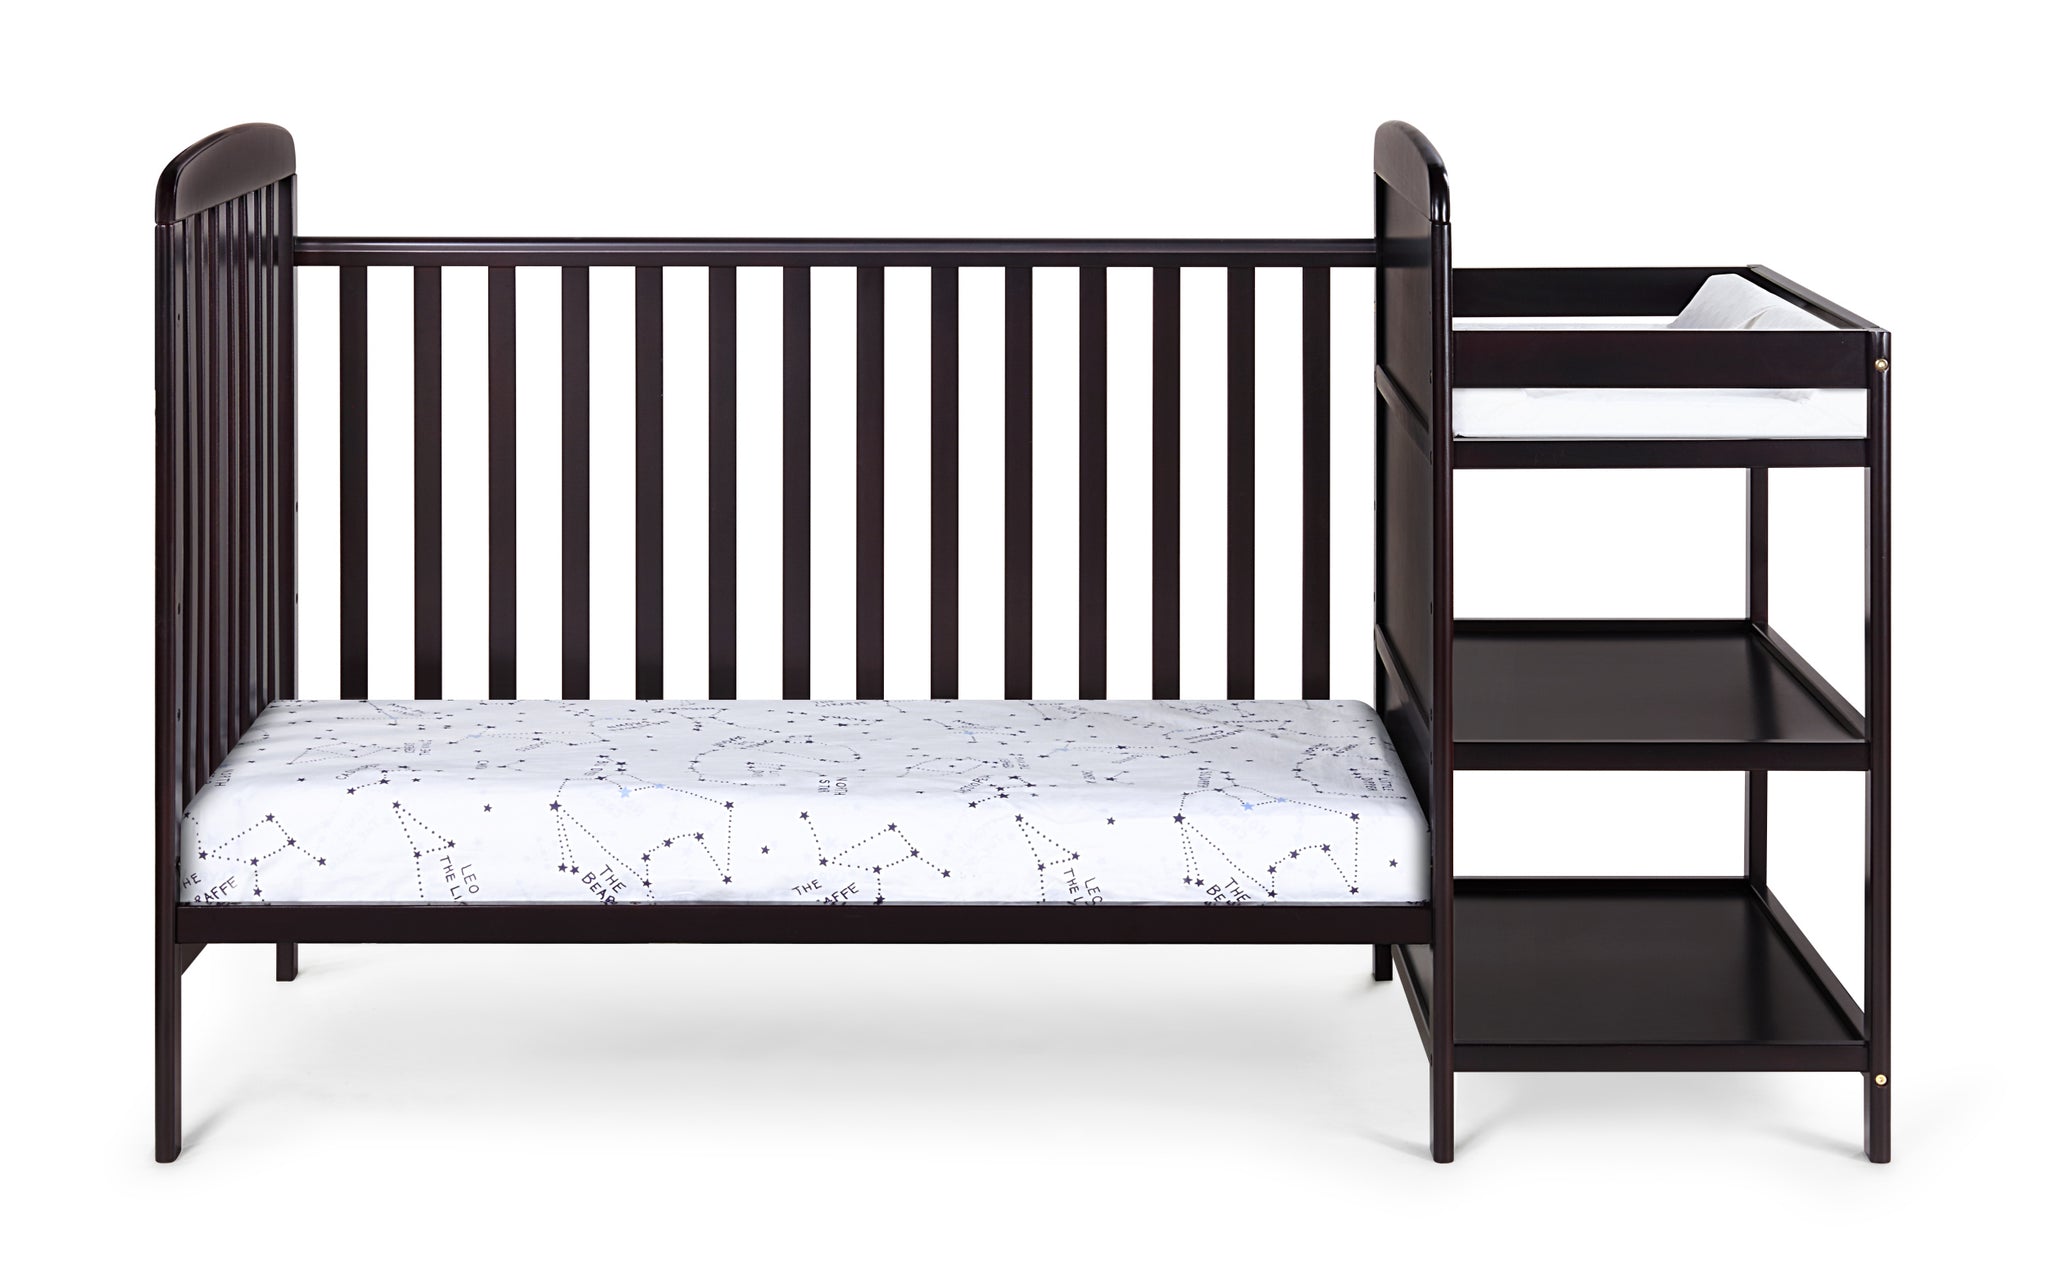 Ramsey 3 in 1 Convertible Crib and Changer Combo espresso-solid wood